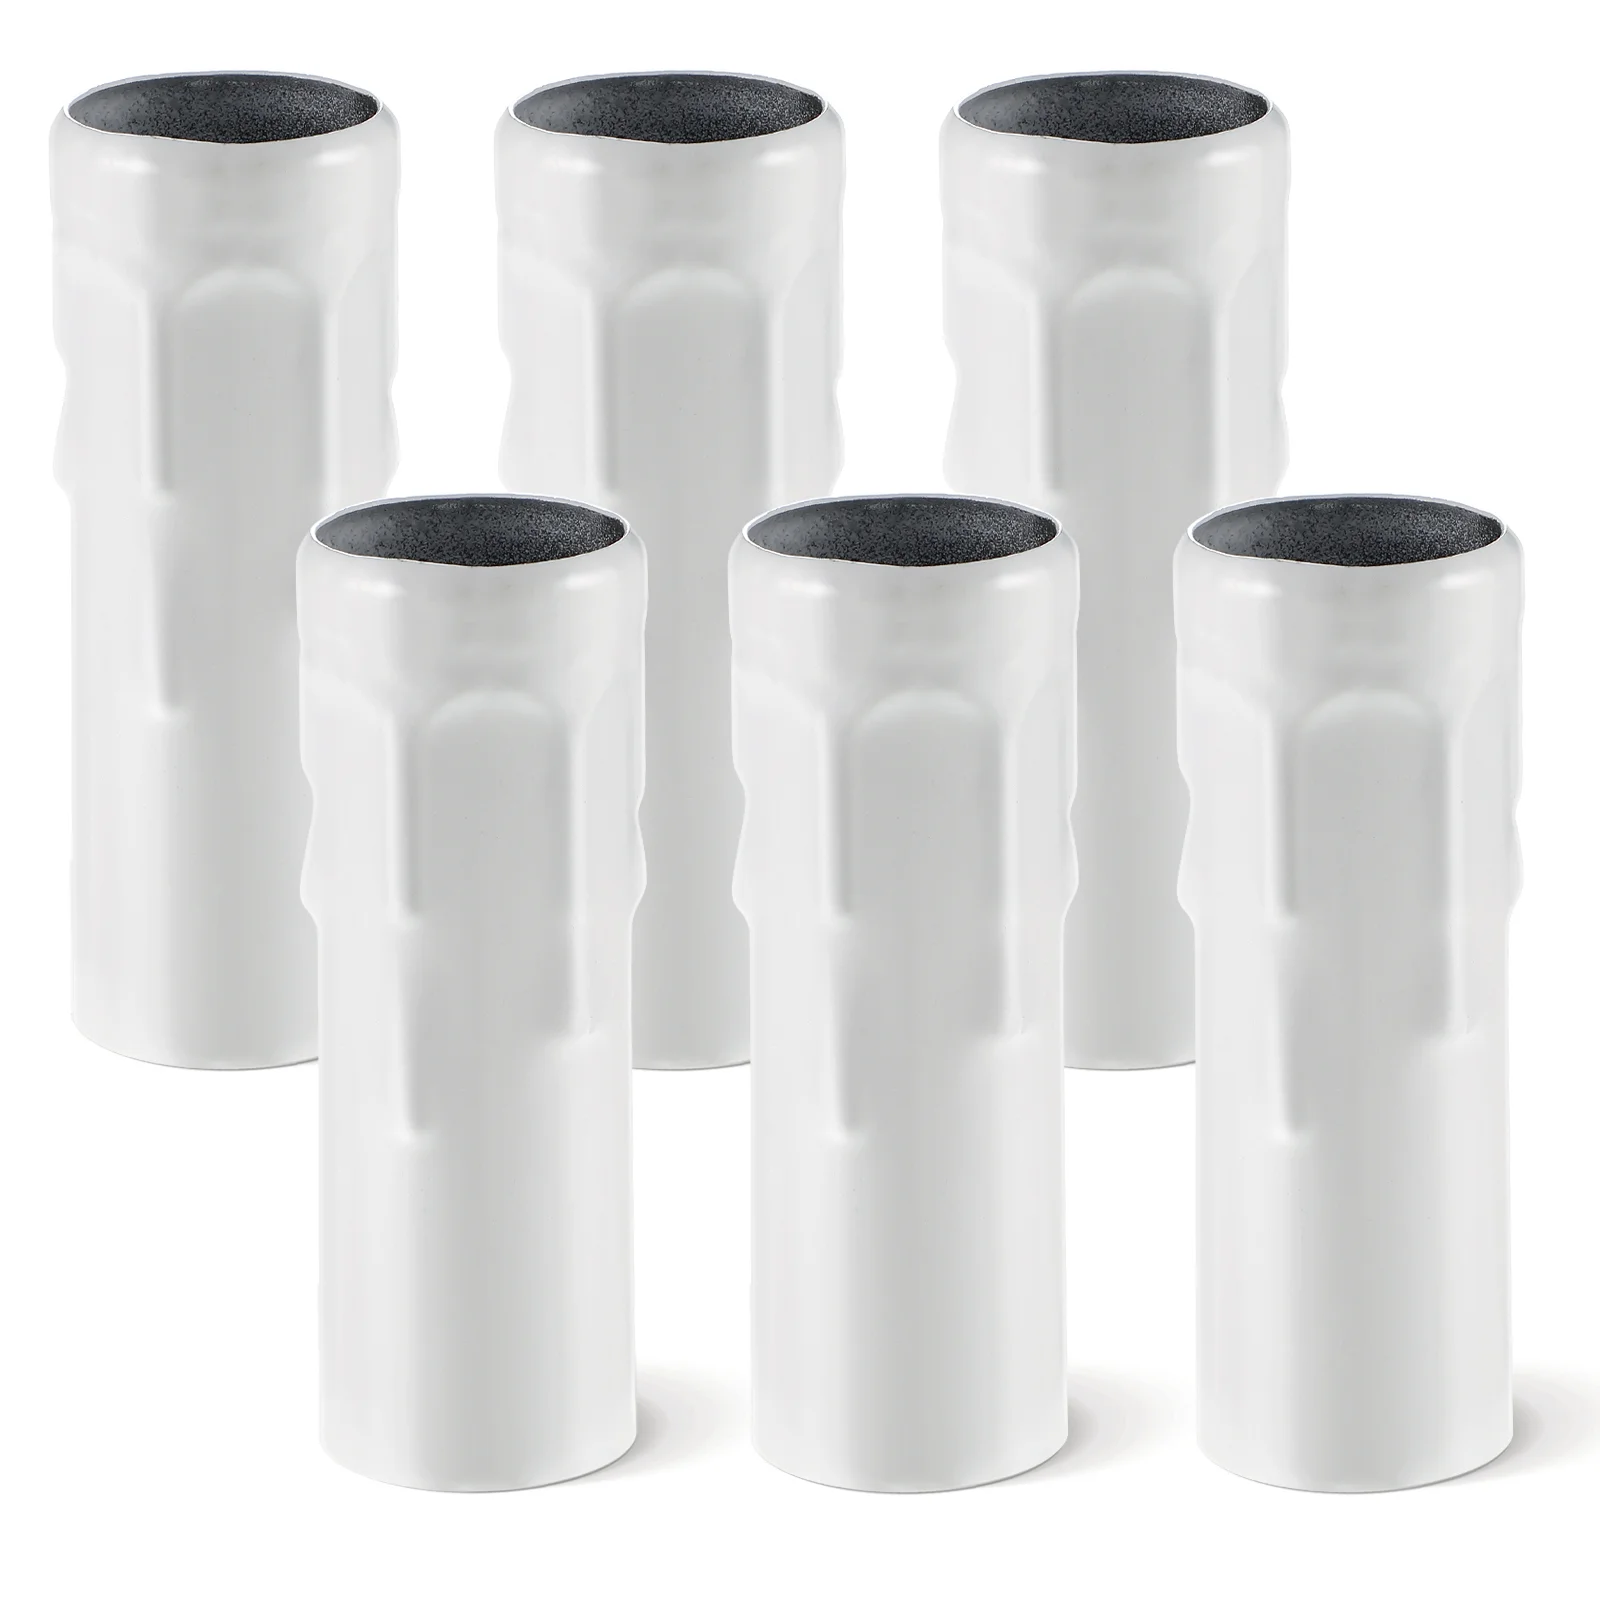 6 Pcs Drip Sleeves Tubes Chandelier Socket Covers for Wall Lamp Chandelier Lamp Holder Decorations